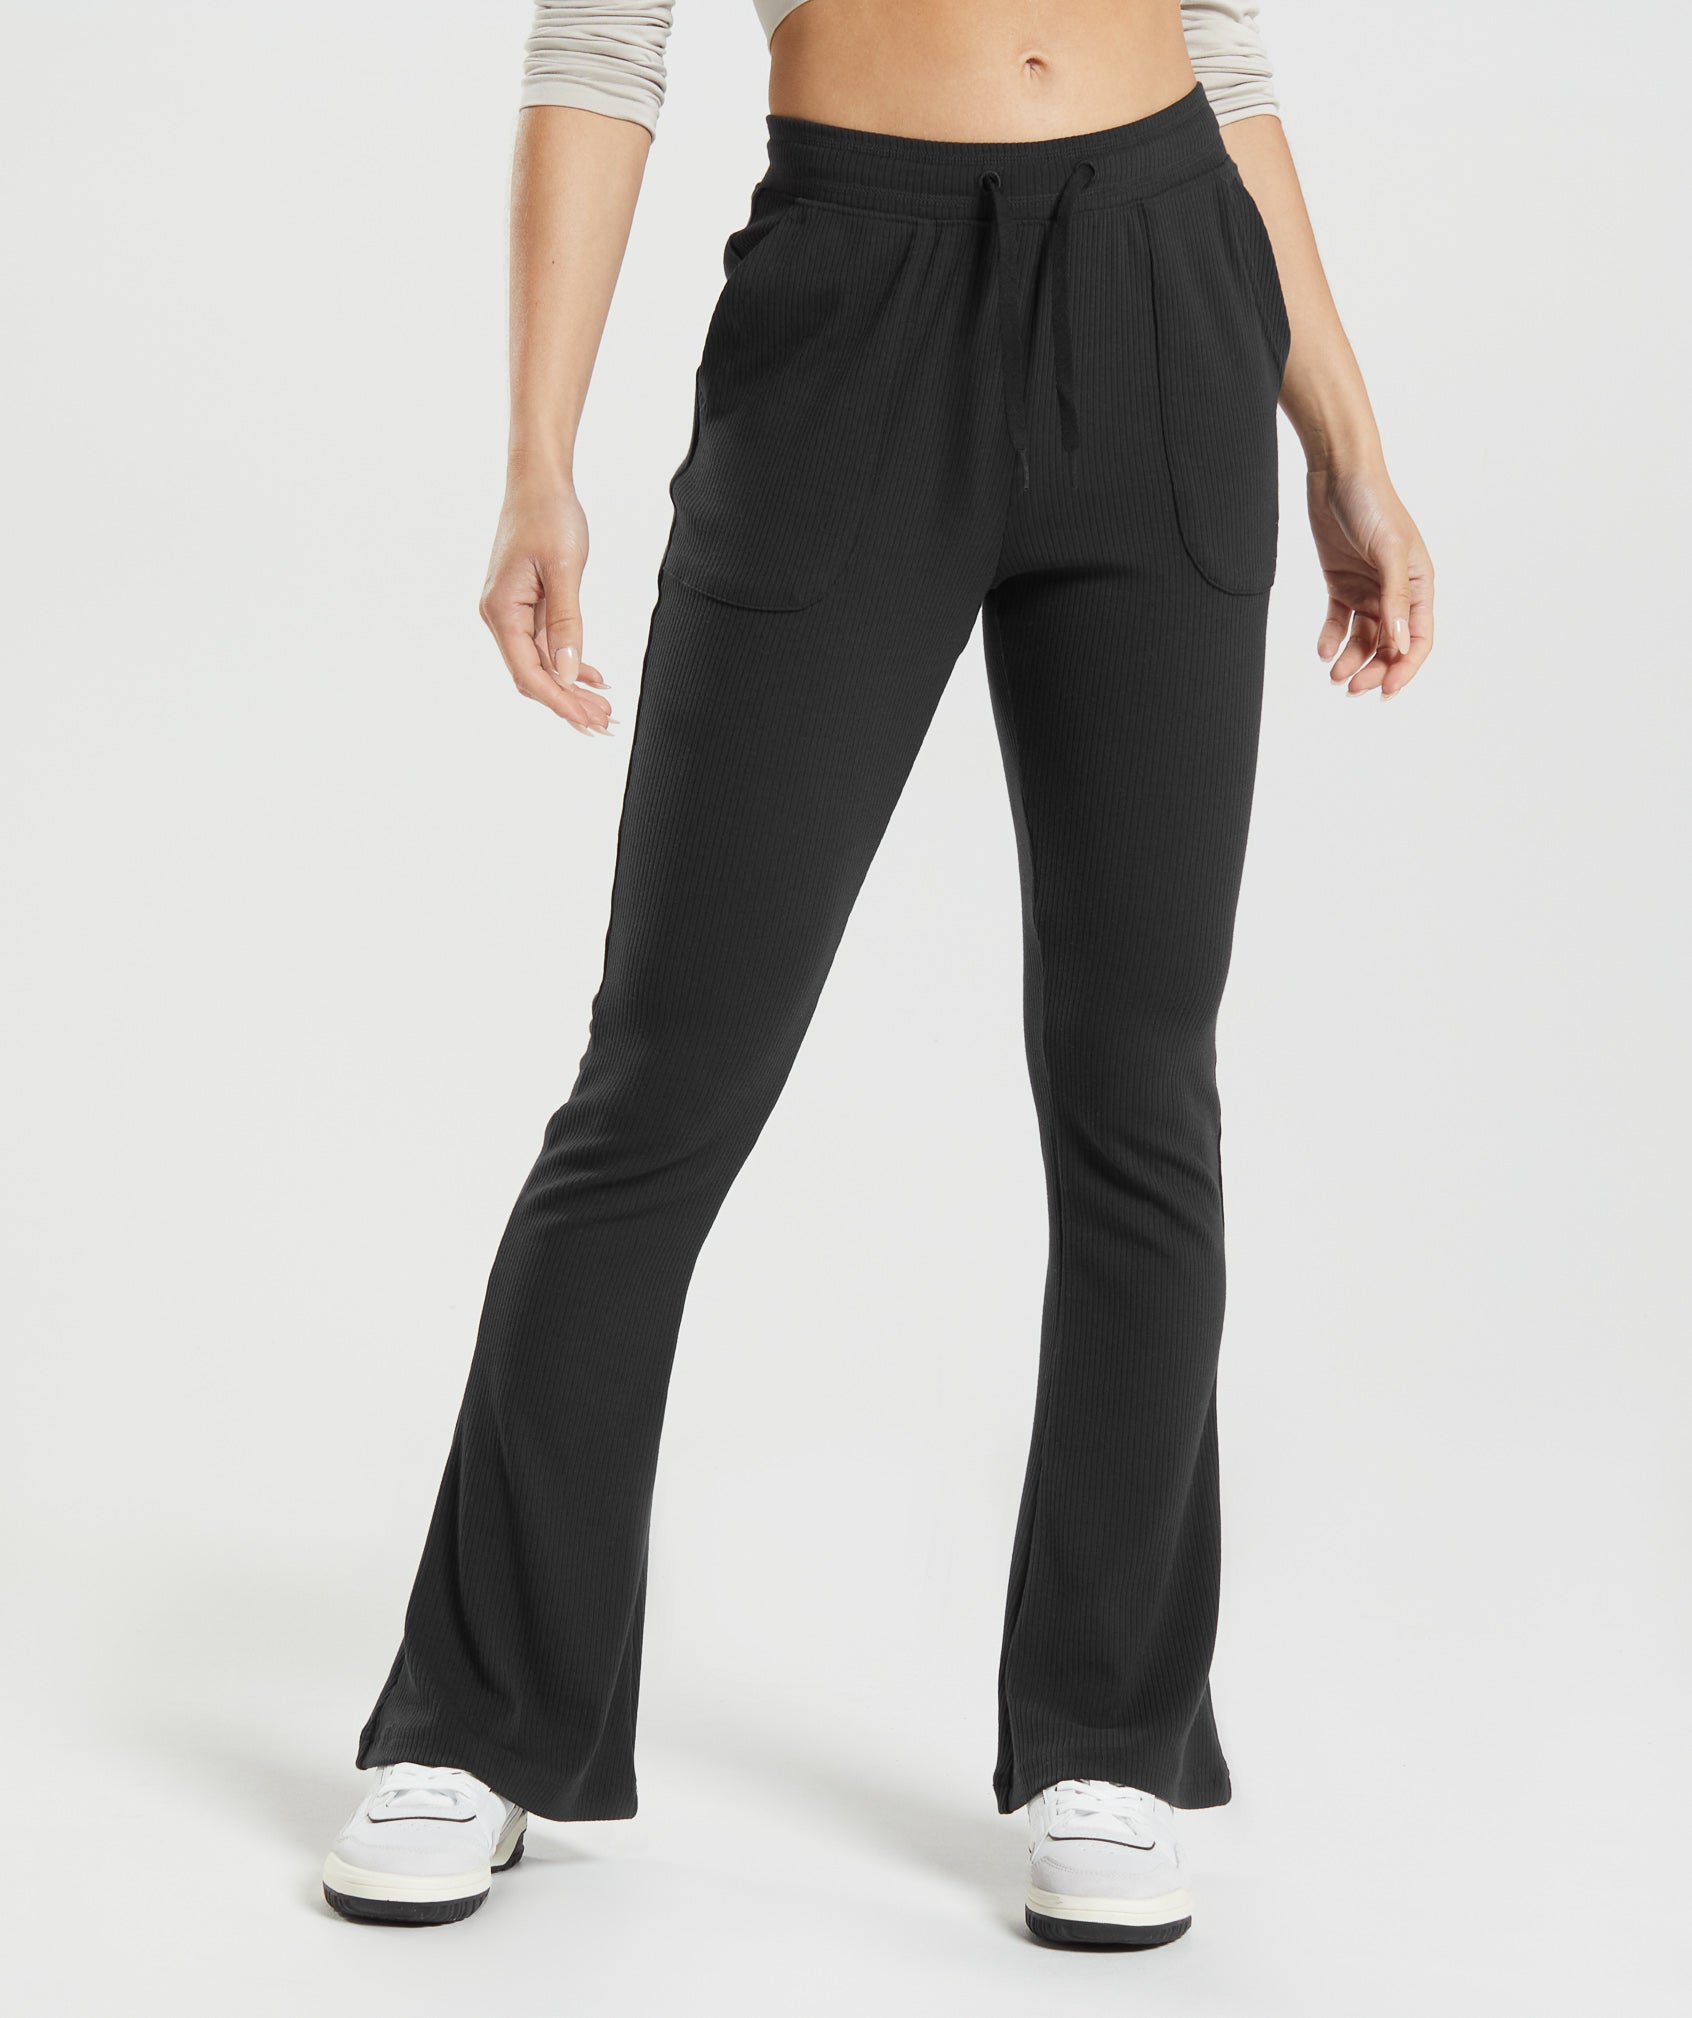 Pause Flared Pants in Black